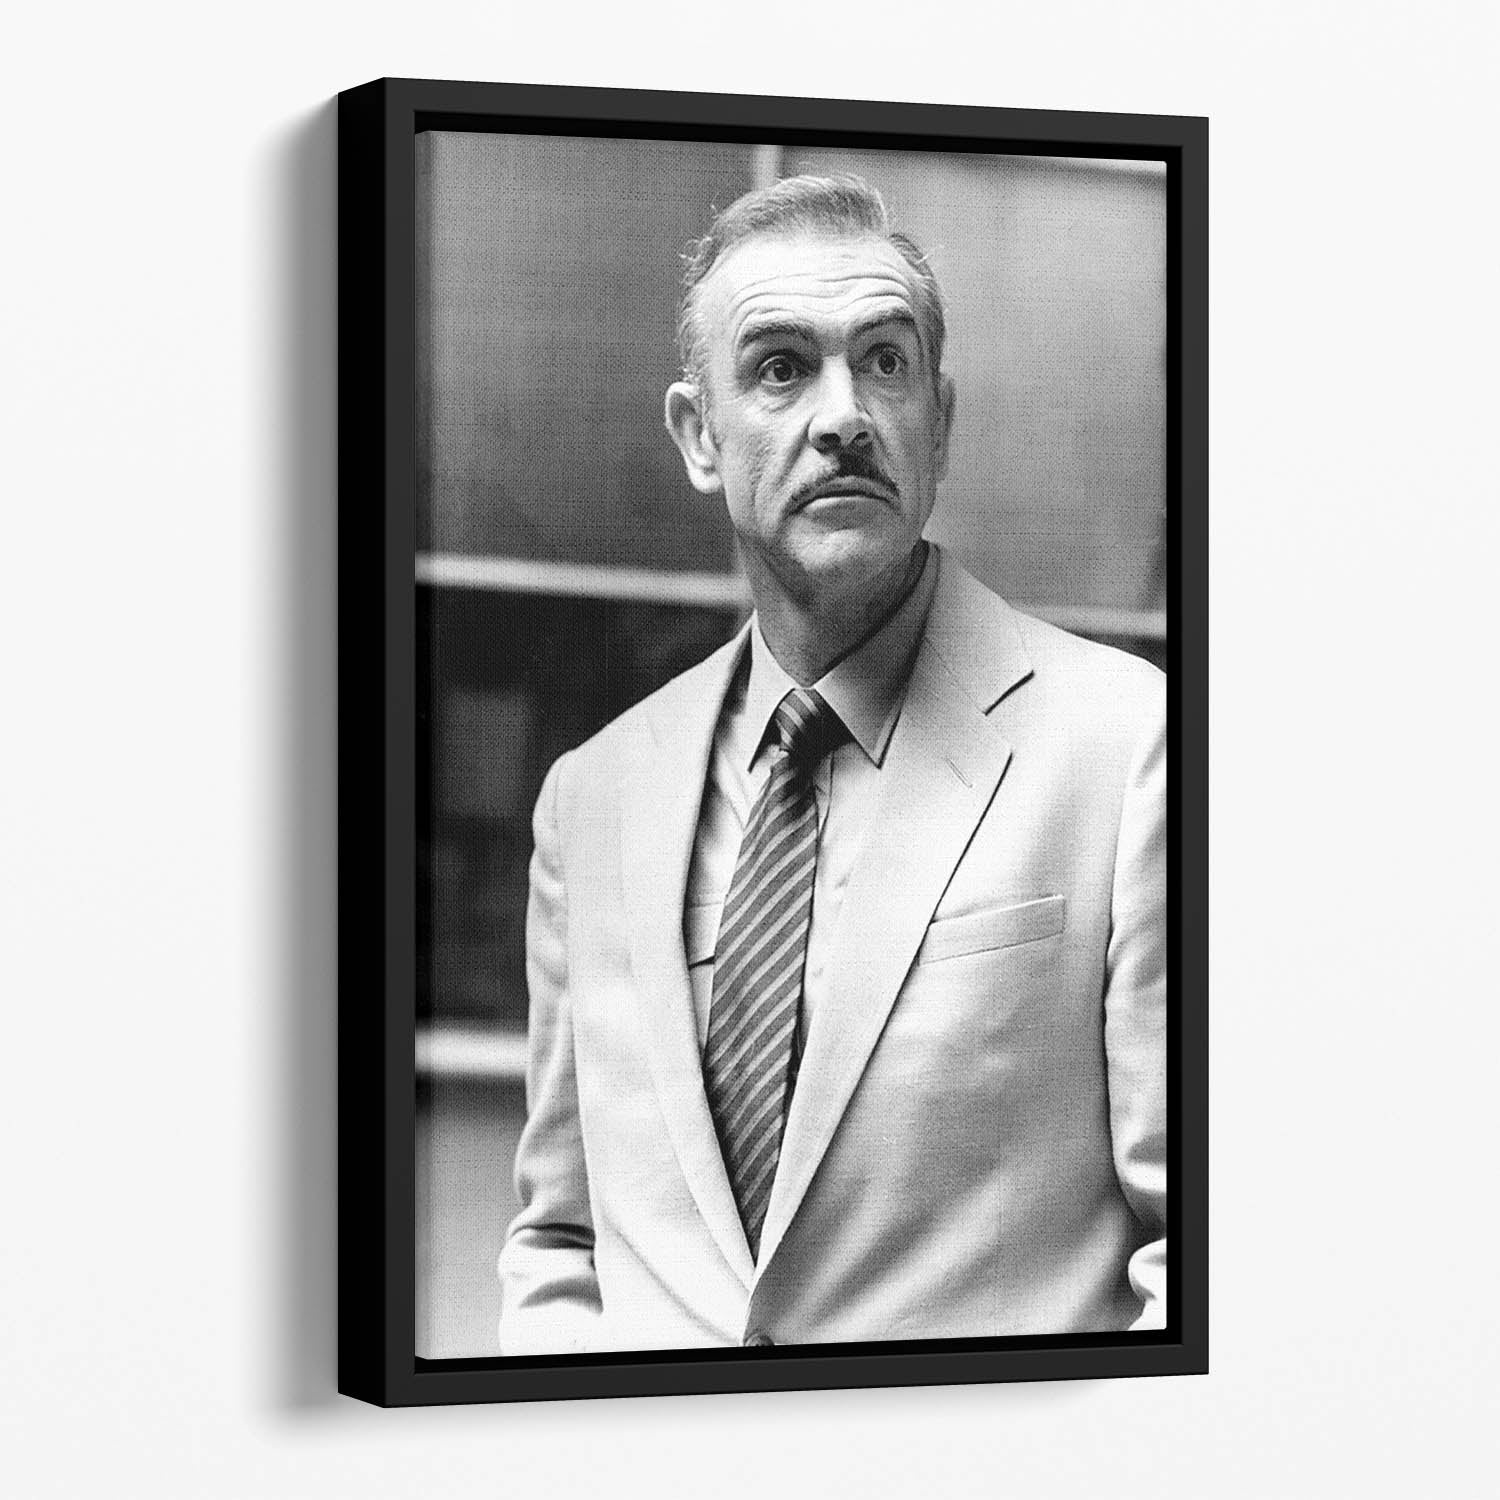 Sean Connery in 1978 Floating Framed Canvas